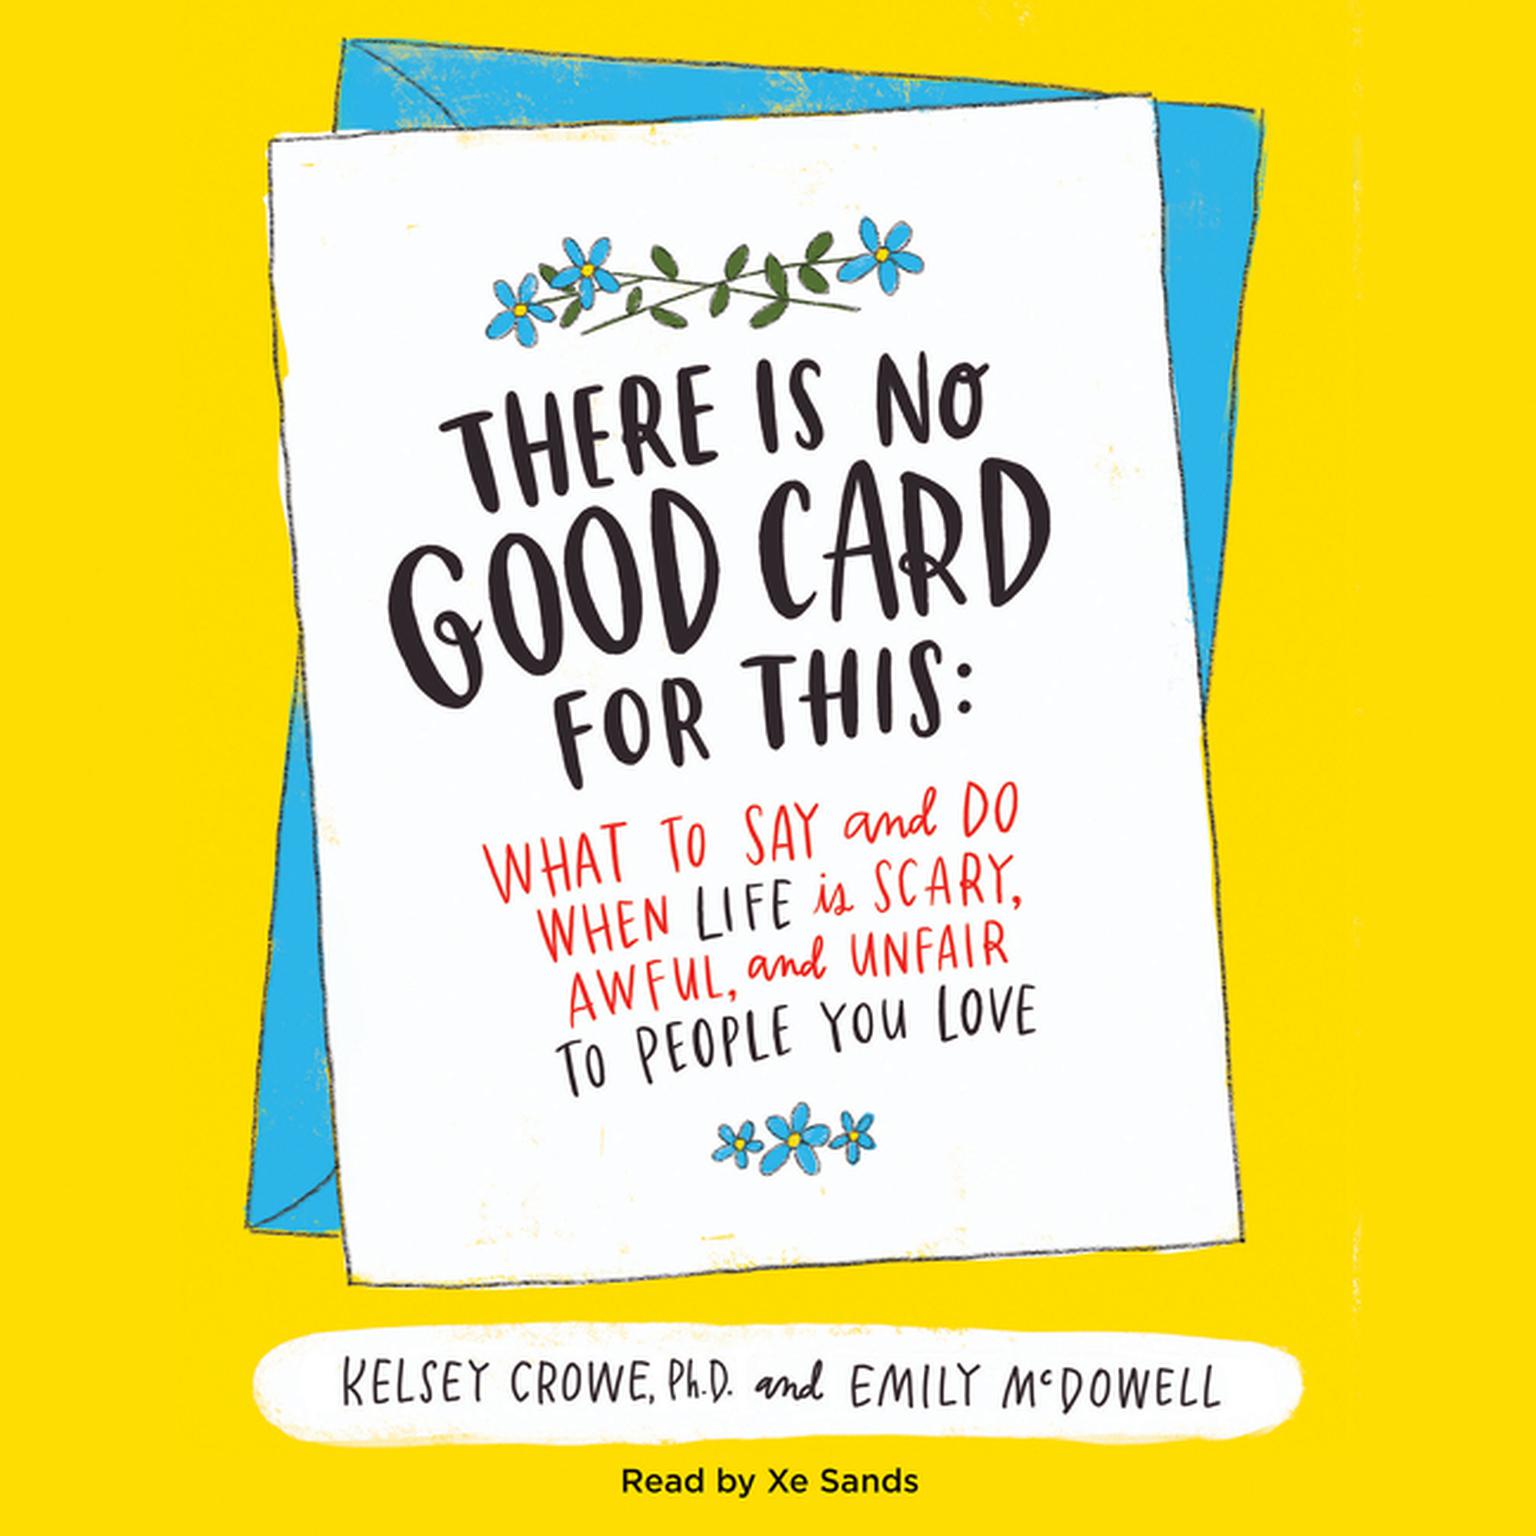 There Is No Good Card for This: What To Say and Do When Life Is Scary, Awful, and Unfair to People You Love Audiobook, by Kelsey Crowe